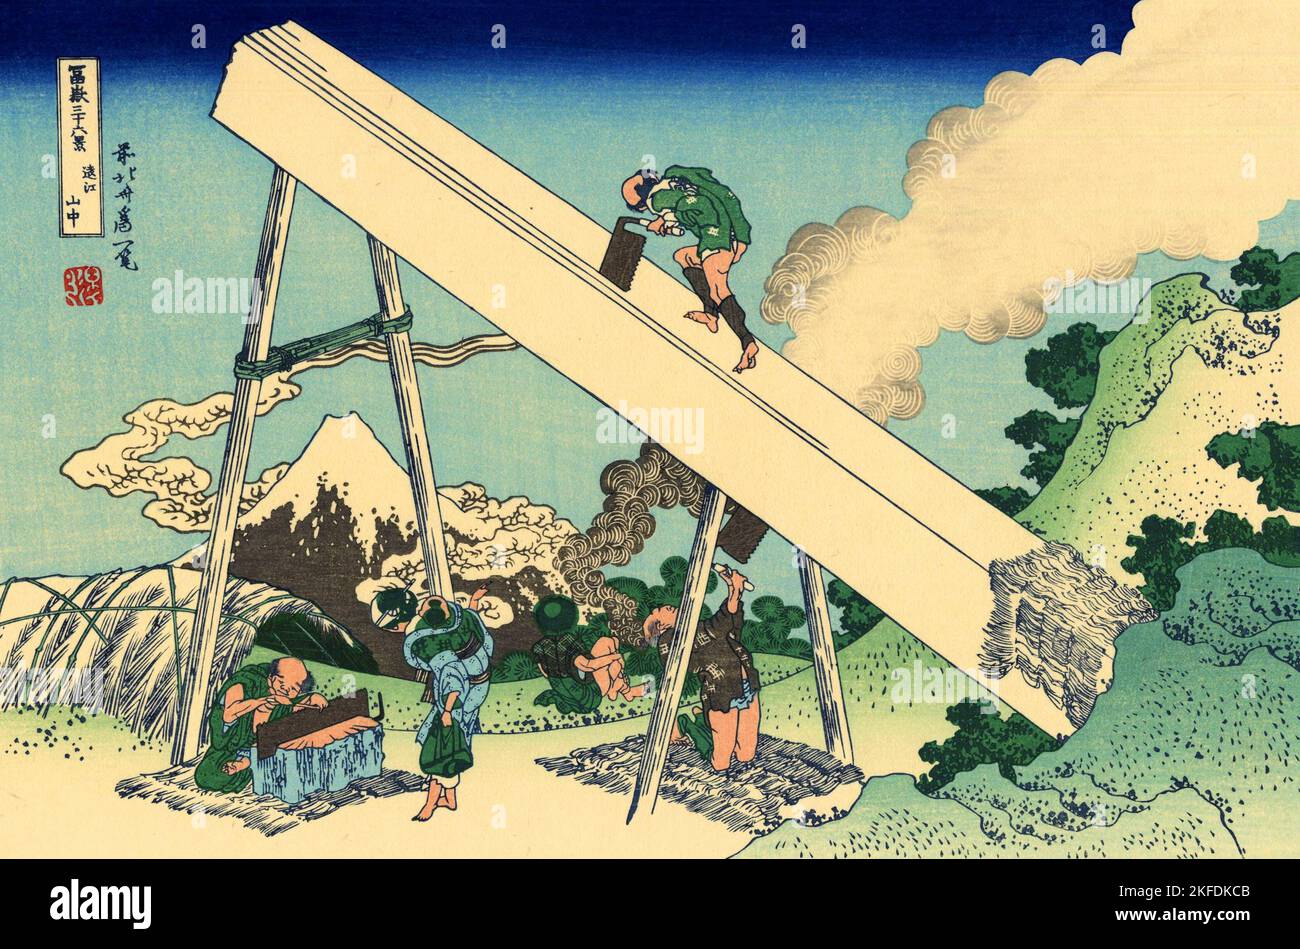 Japan: ‘In the Mountains of Totomi’. Ukiyo-e woodblock print from the series ‘Thirty-six Views of Mount Fuji’ by Katsushika Hokusai (31 October 1760 - 10 May 1849), c. 1830.  ‘36 Views of Mount Fuji’ is an ‘ukiyo-e’ series of large woodblock prints by the artist Katsushika Hokusai. The series depicts Mount Fuji in differing seasons and weather conditions from a variety of places and distances. It actually consists of 46 prints created between 1826 and 1833. The first 36 were included in the original publication and, due to their popularity, 10 more were added after the original publication. Stock Photo